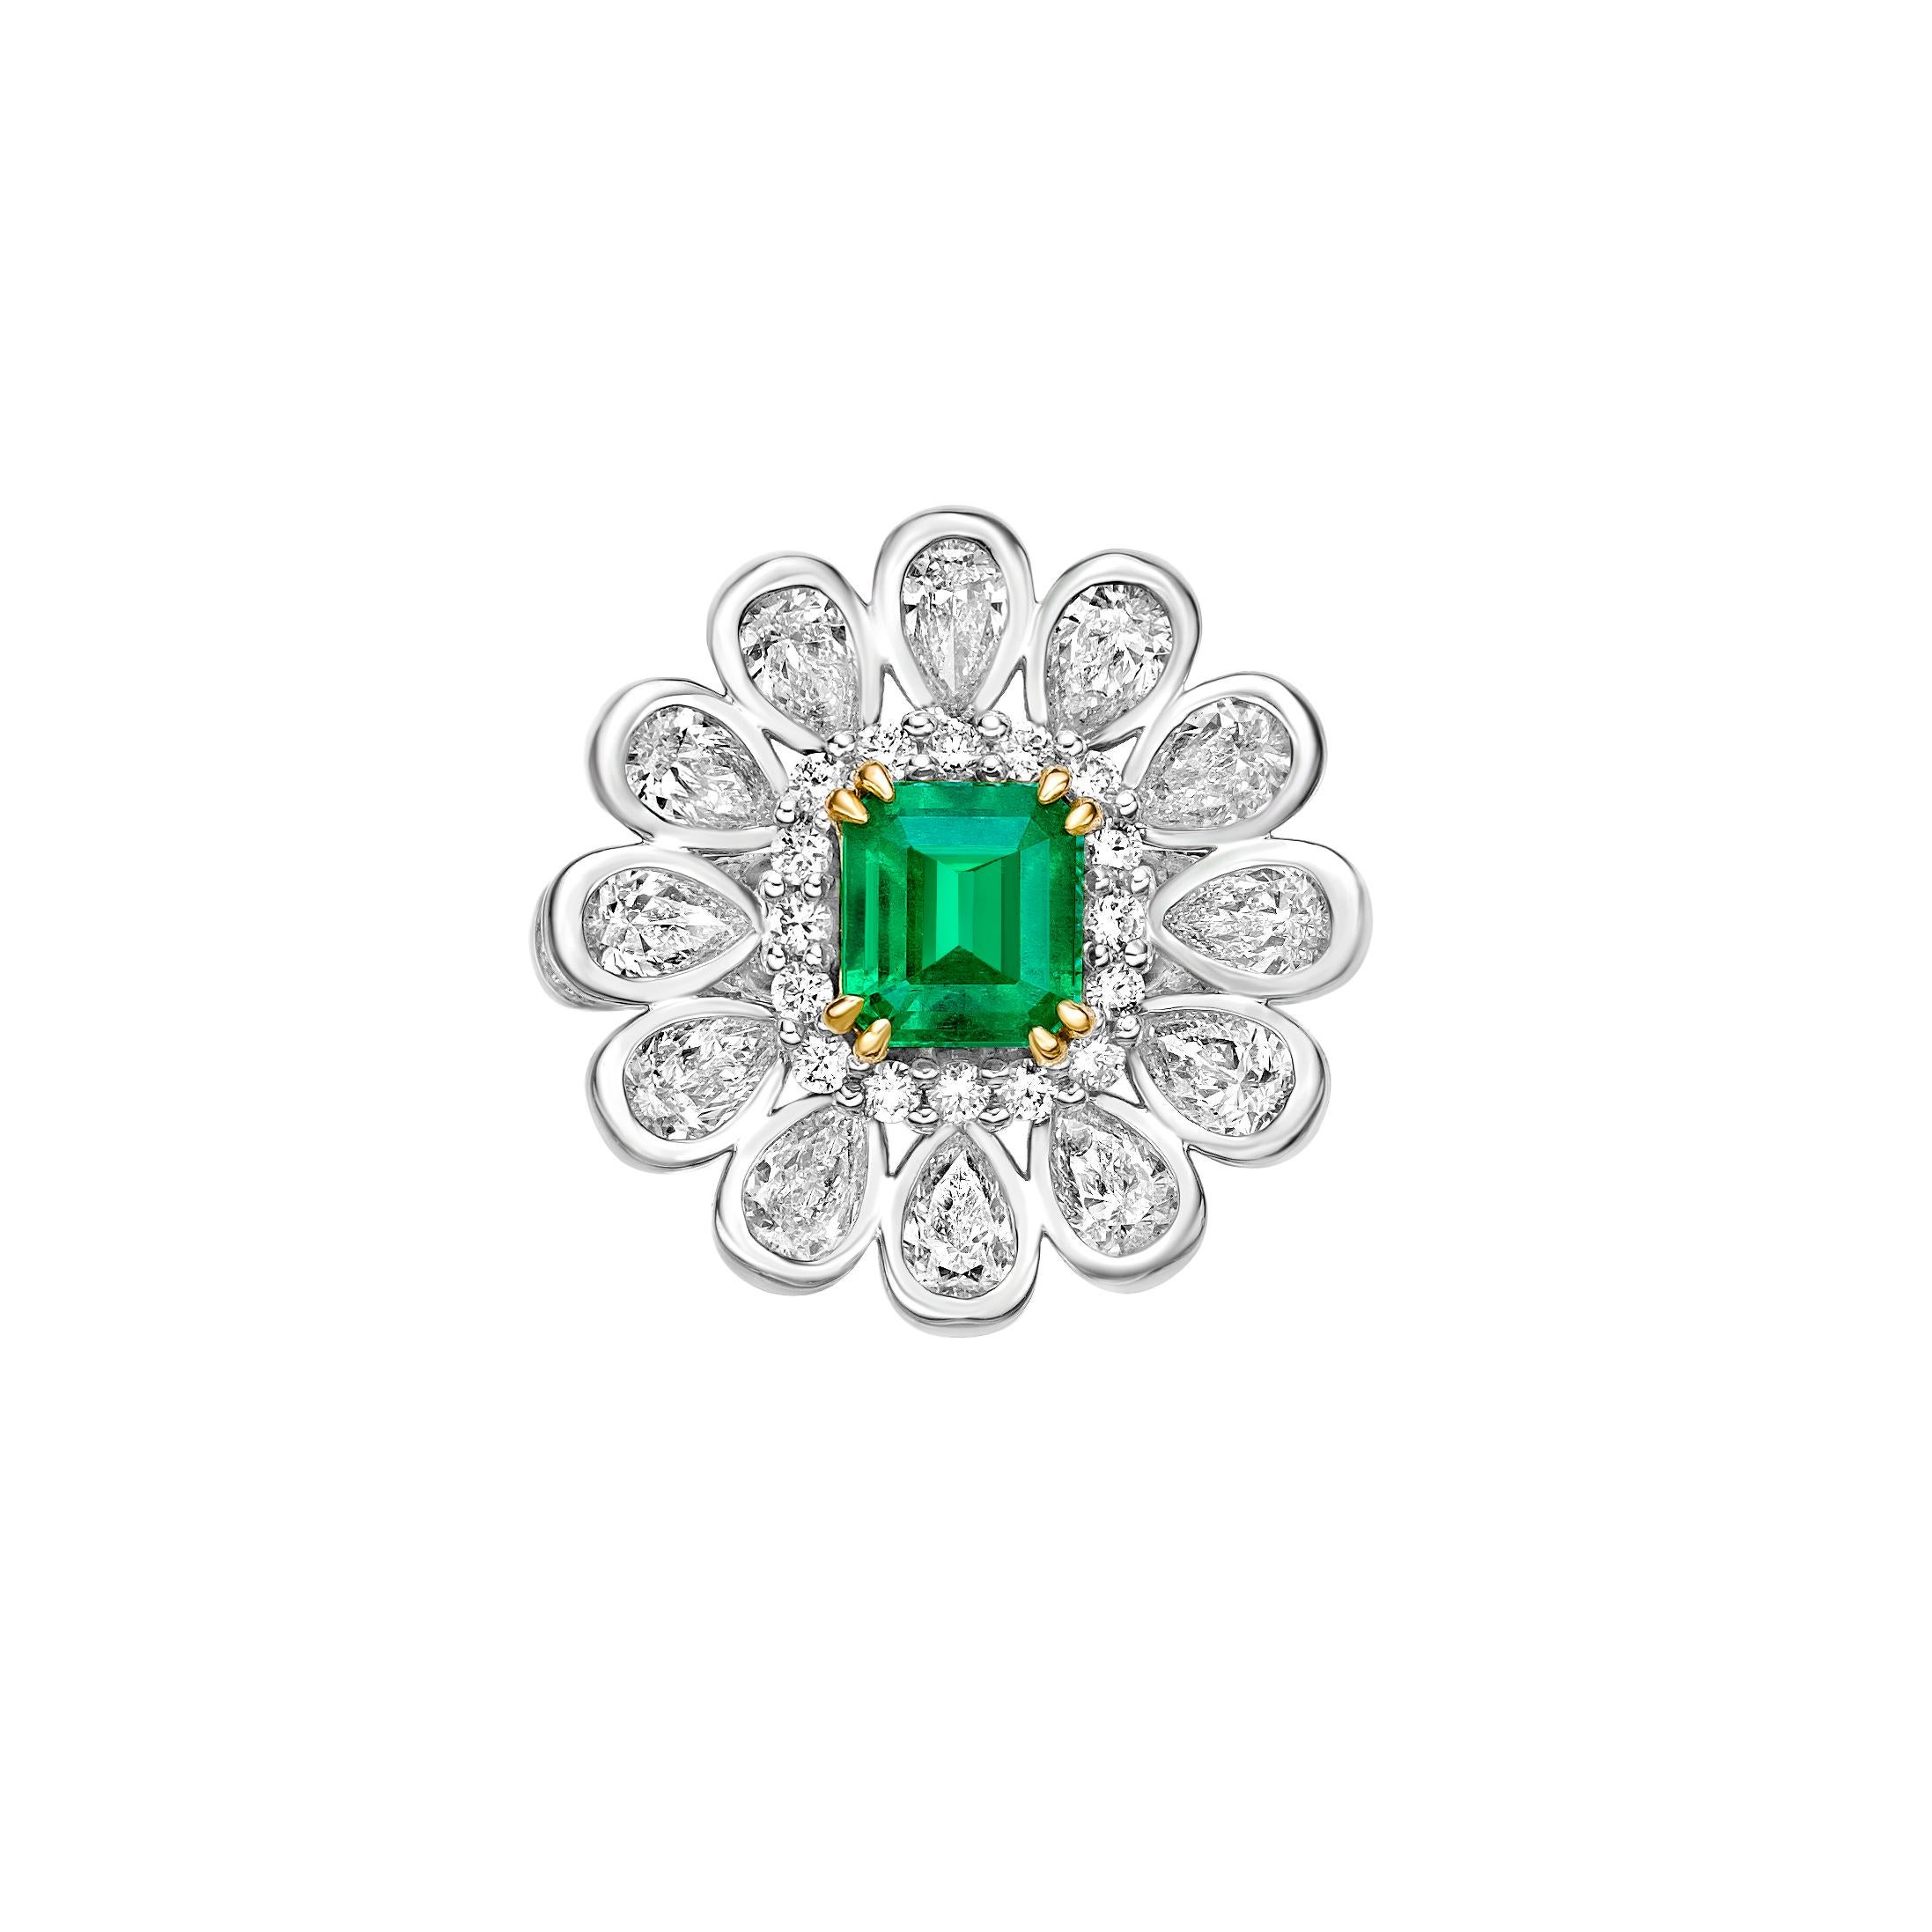 Contemporary 1.15 Carat Sunfiower Emerald Bridal Ring in 18KWYG with White Diamond. For Sale